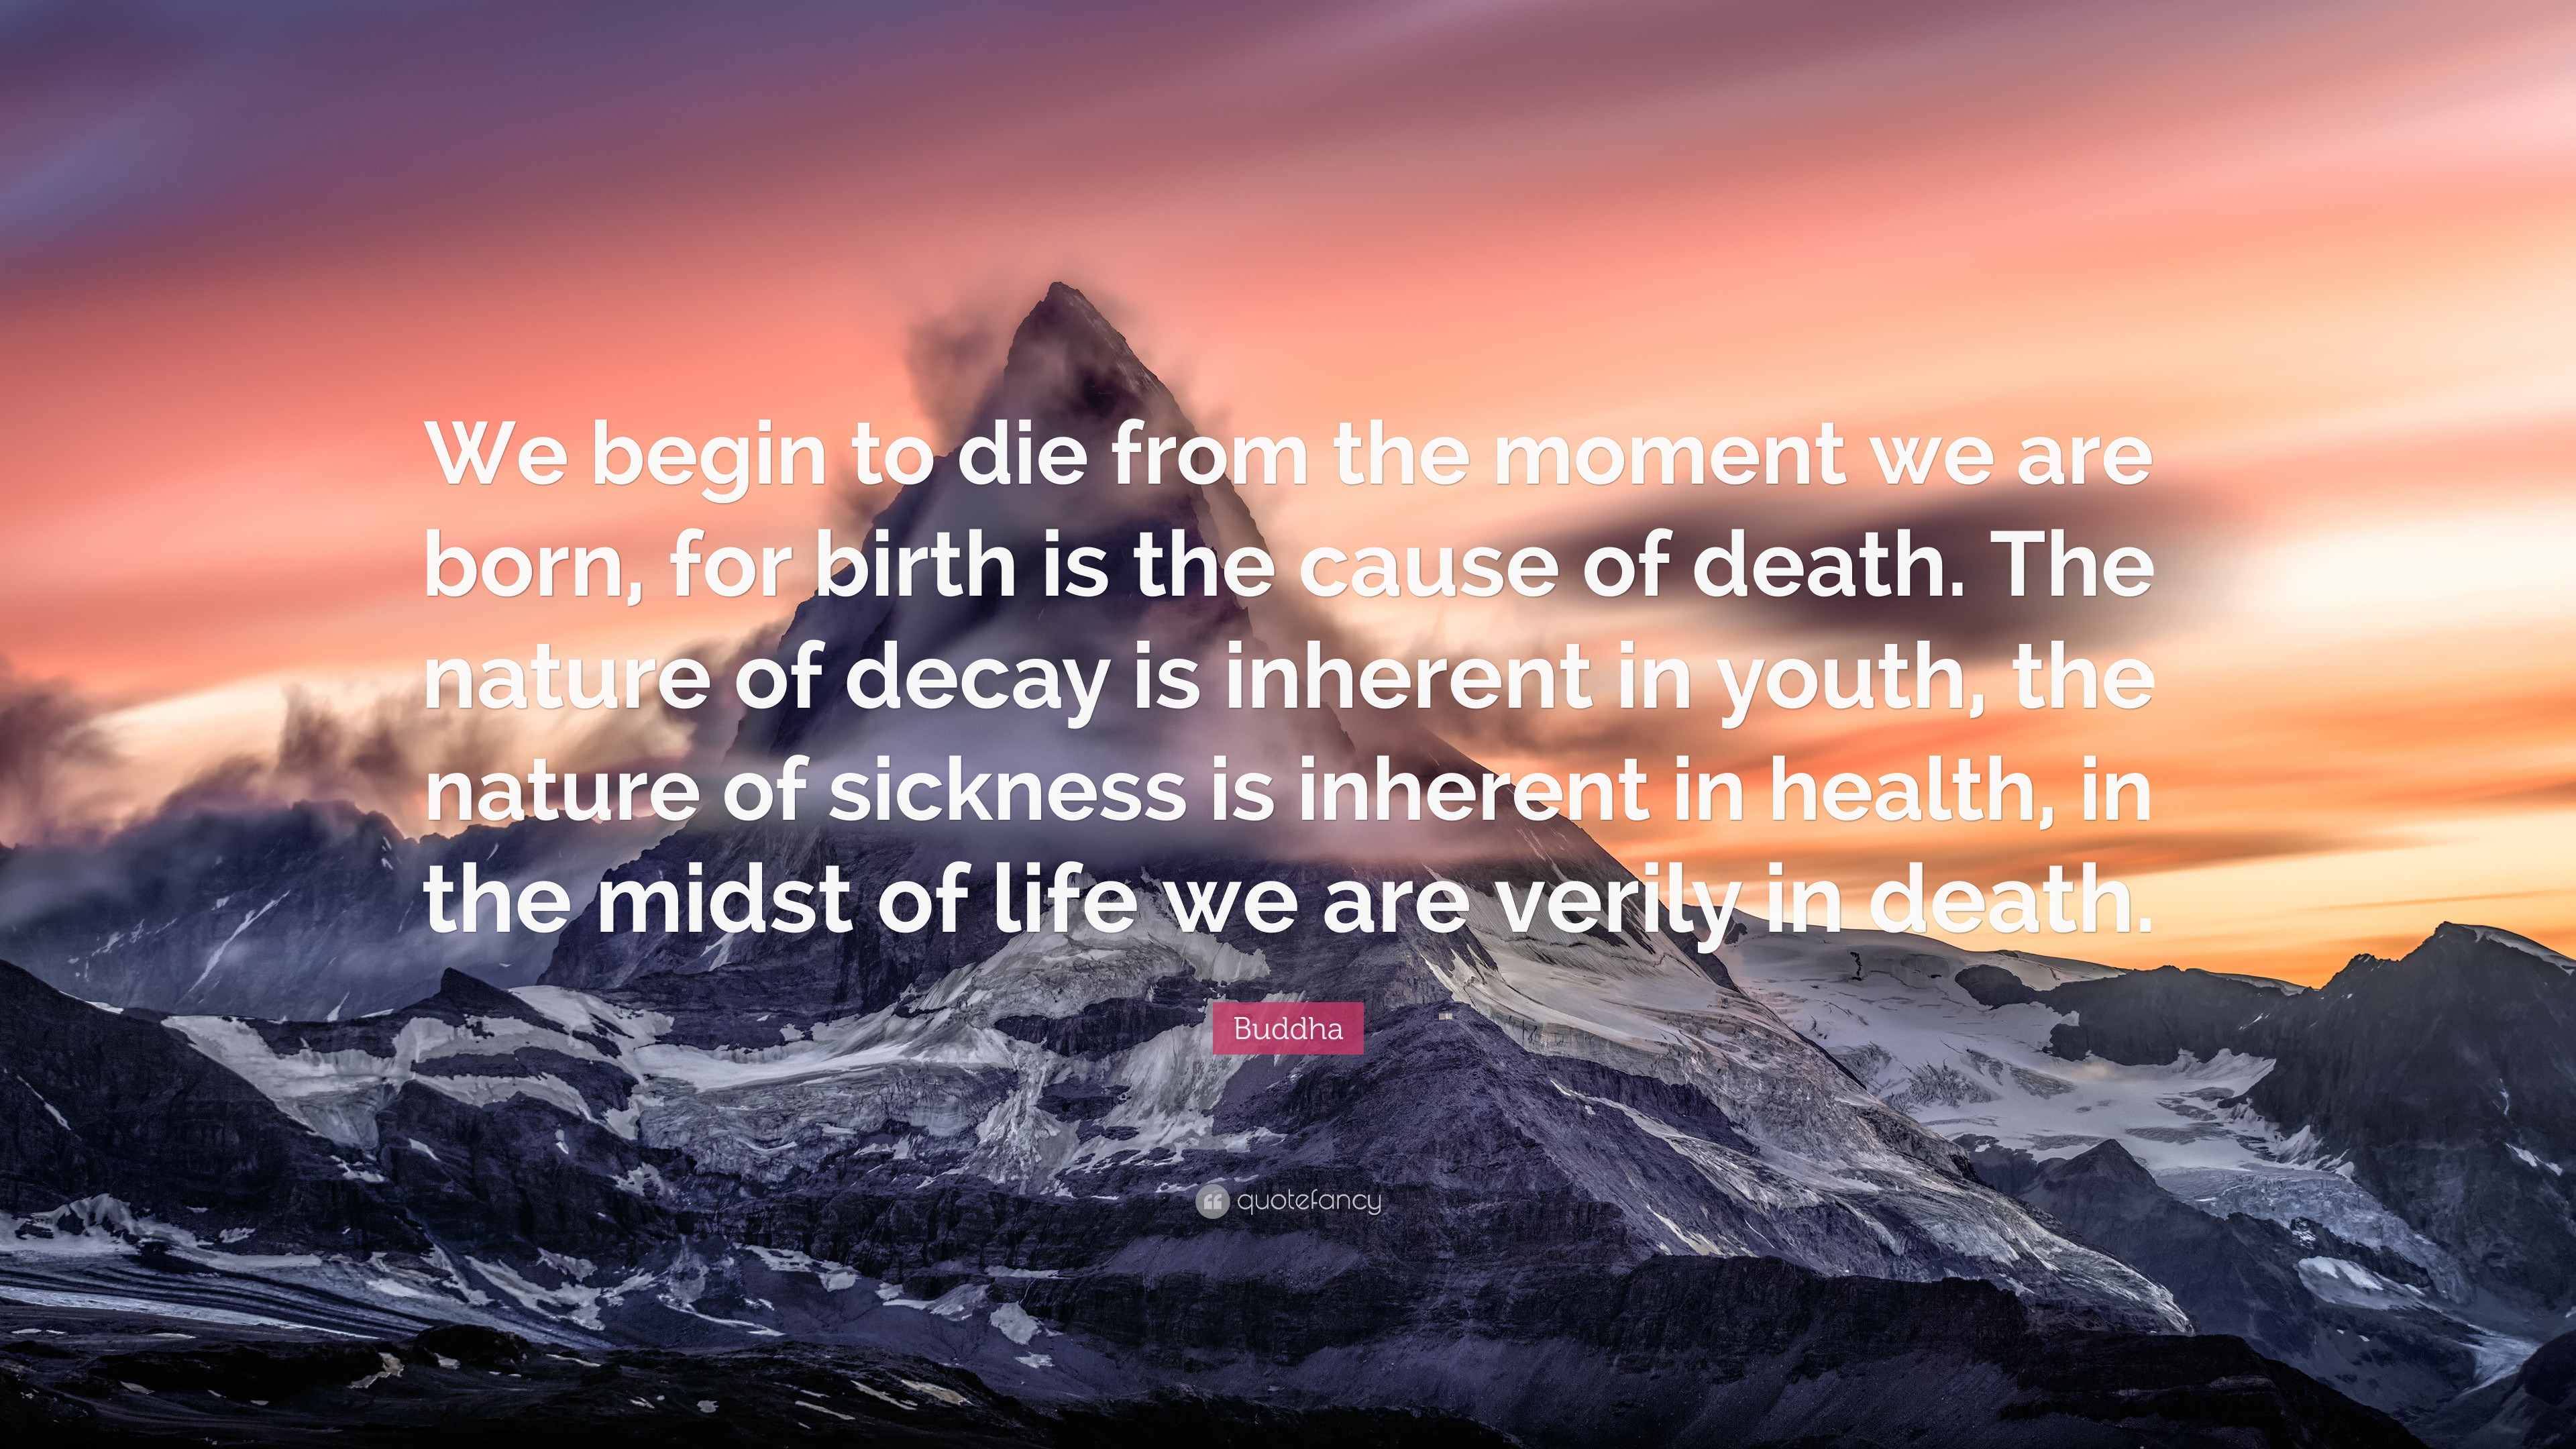 buddhist quotes on life and buddha quote u201cwe begin to from the moment we are born for